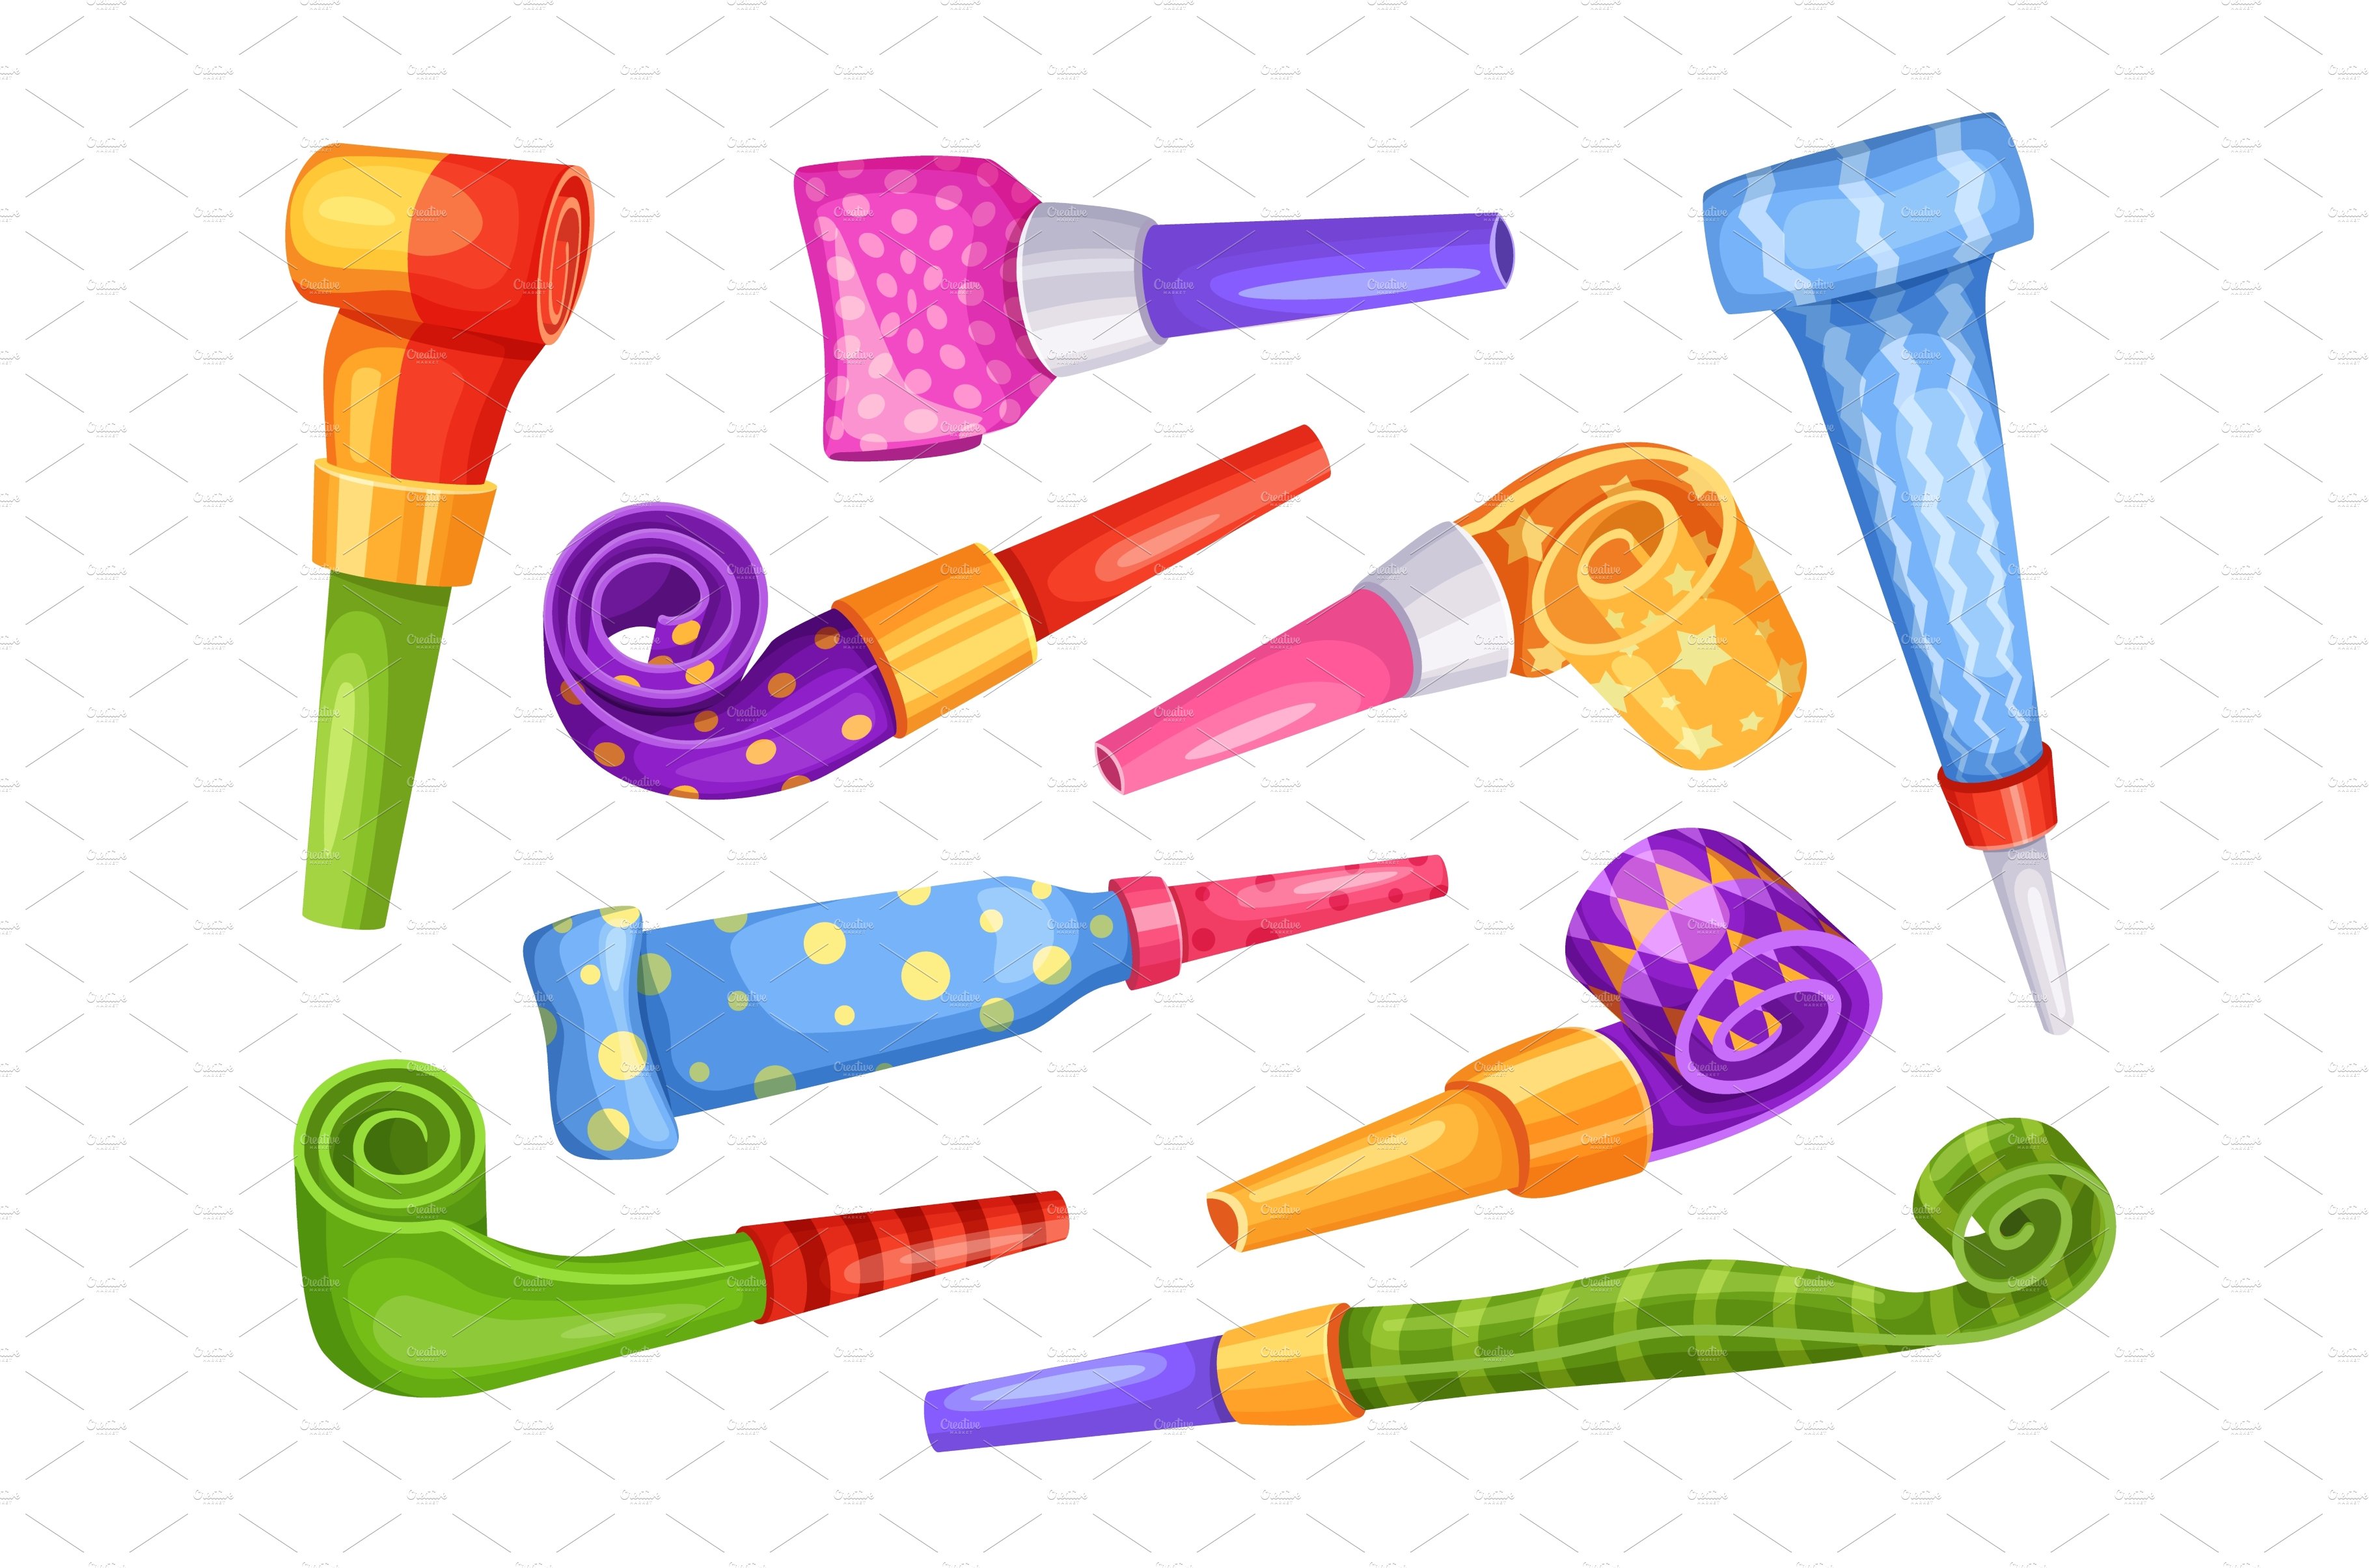 Cartoon party blowers. Tube horn cover image.